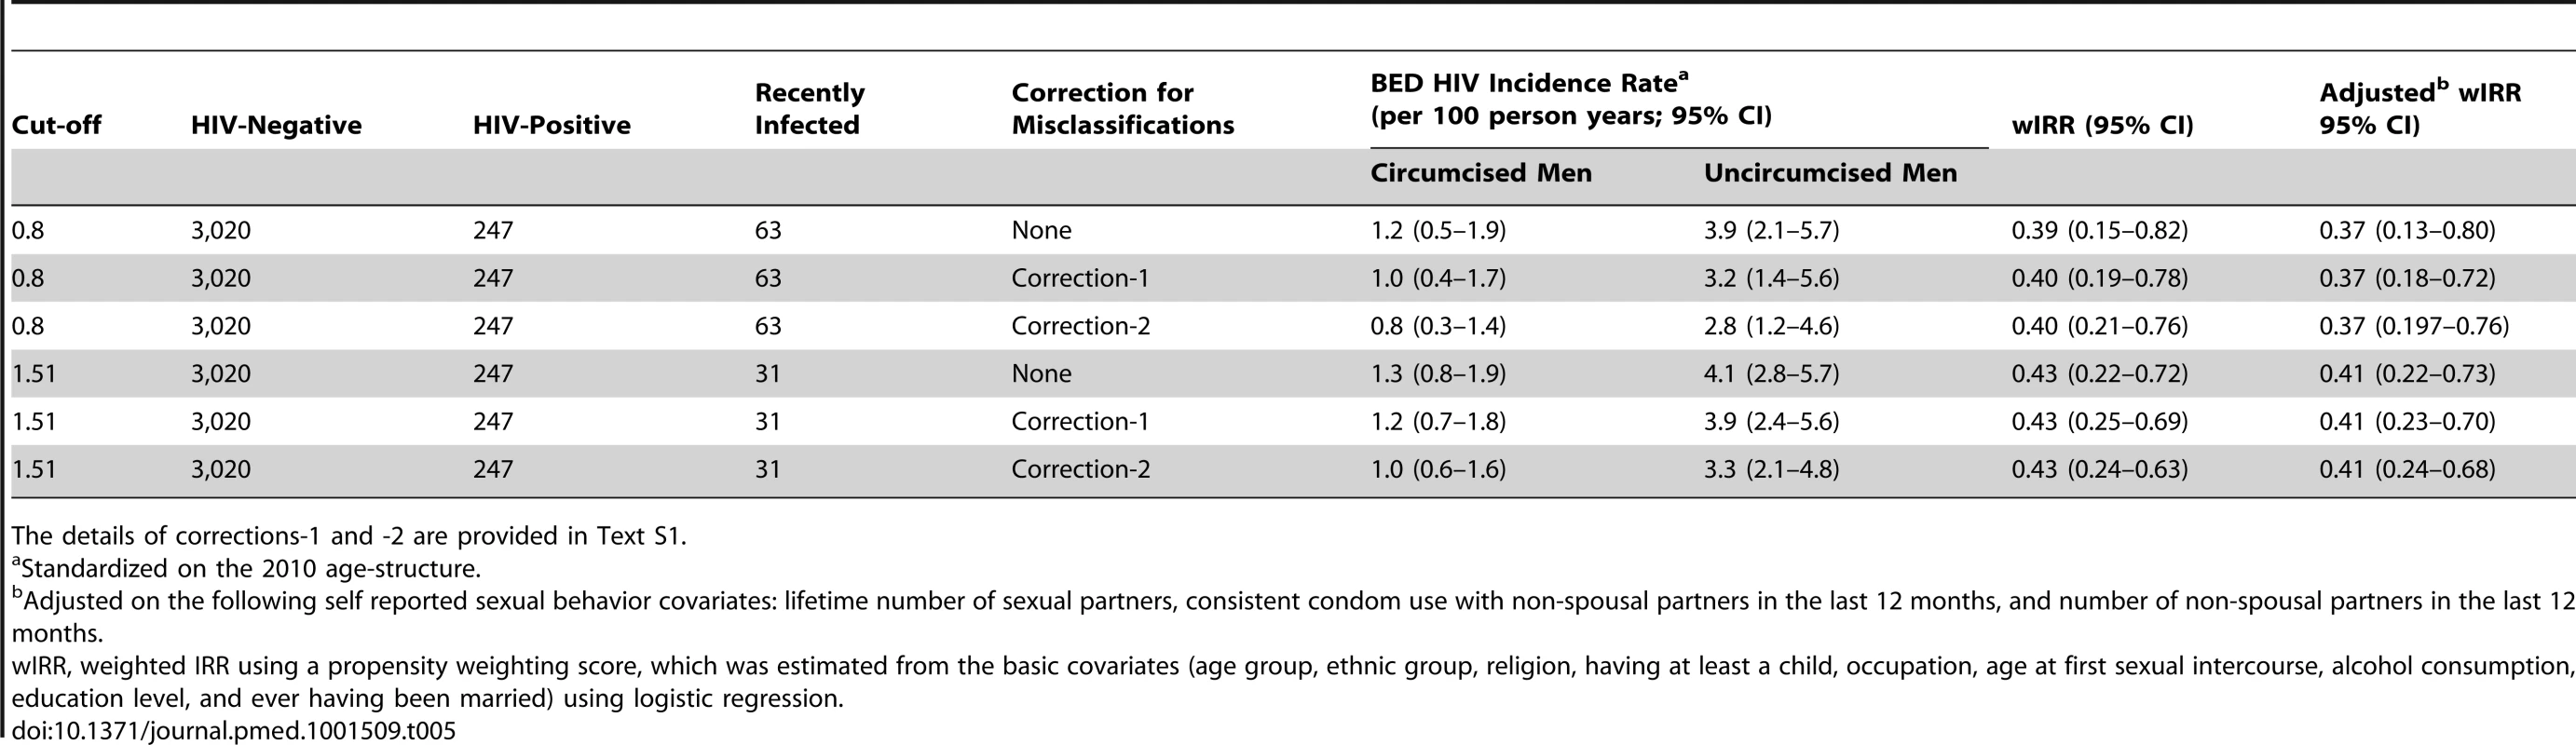 HIV incidence rates and rate ratios obtained in 2010–2011 with the BED incidence assay for selected cut-off values, with and without corrections for misclassifications.